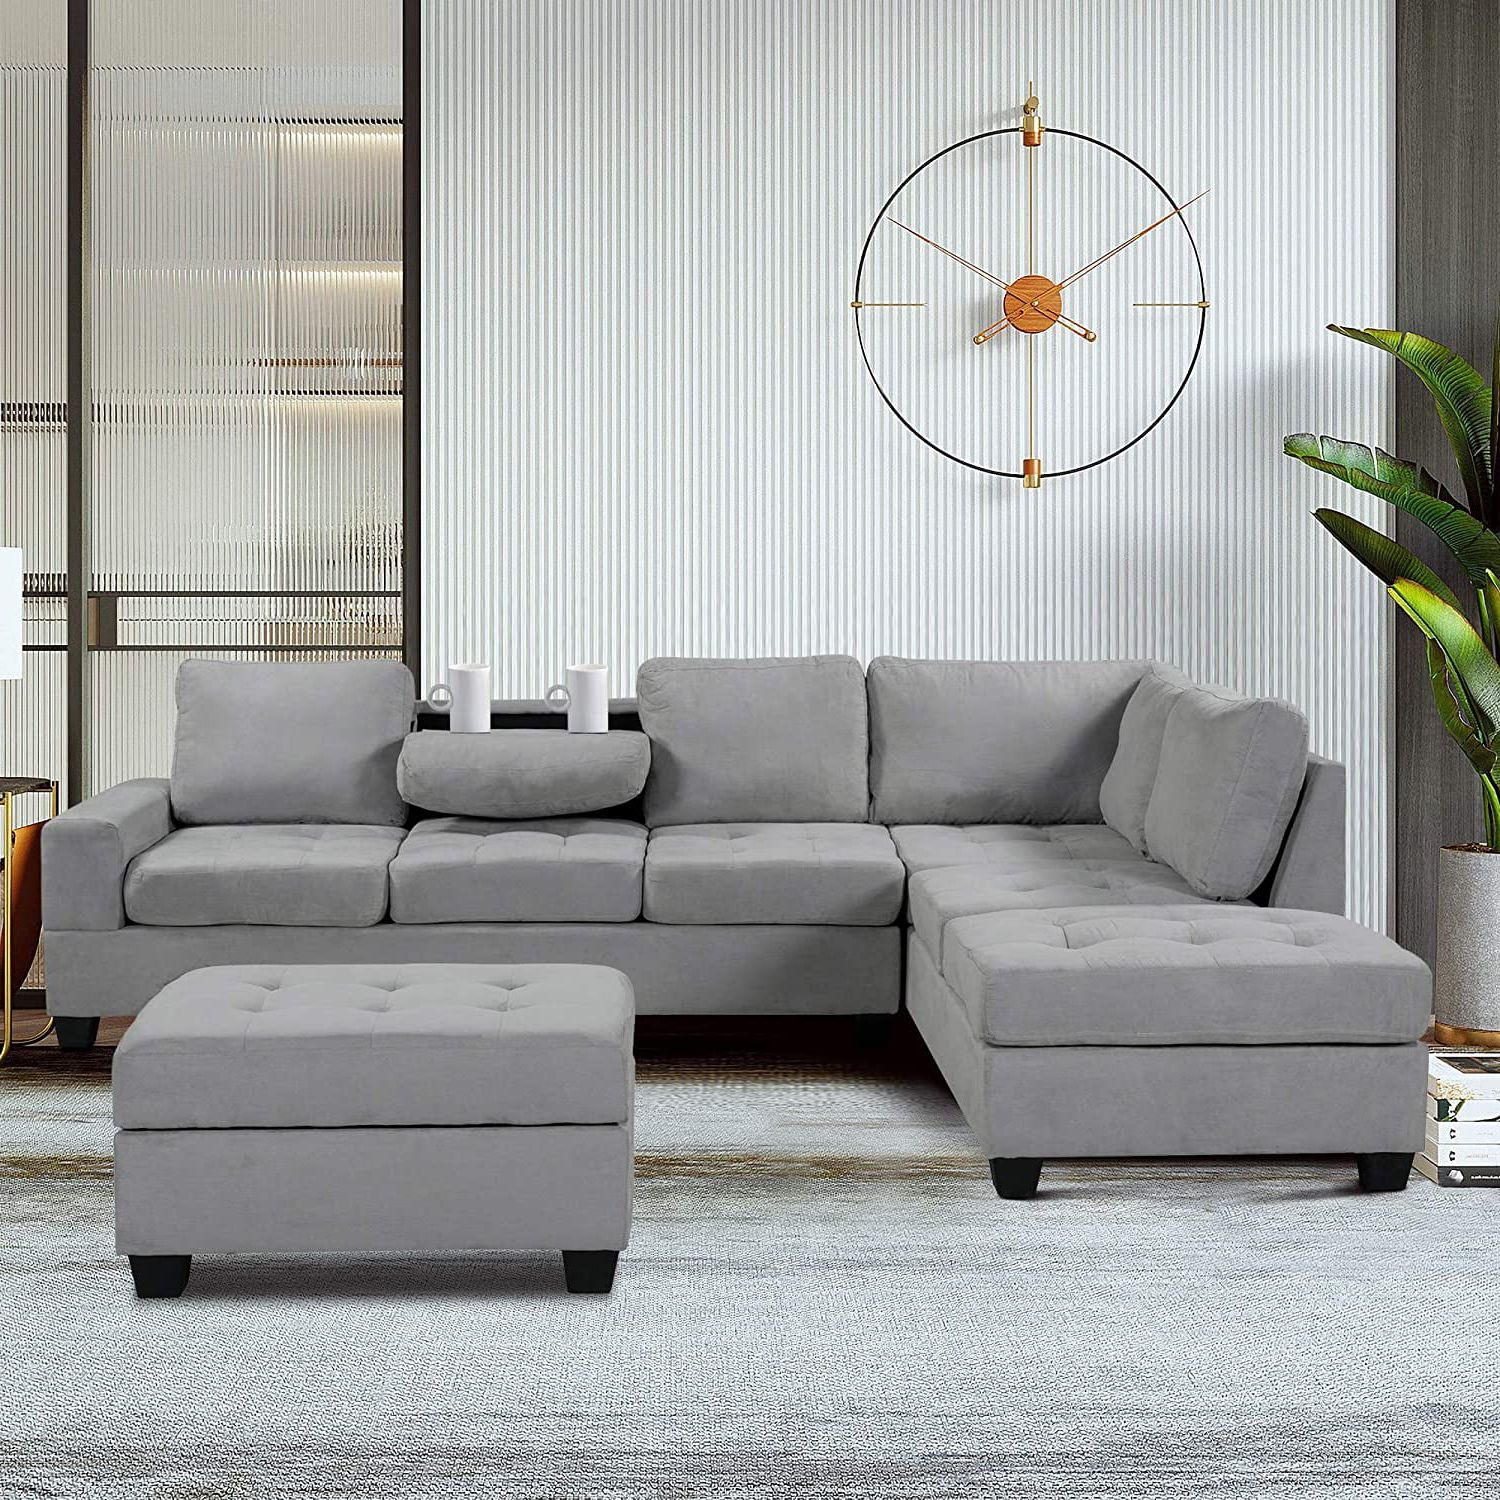 2018 Convertible L Shaped Sectional Sofas Pertaining To 3 Piece Convertible Sectional Sofa L Shaped Couch With Reversible (View 7 of 15)